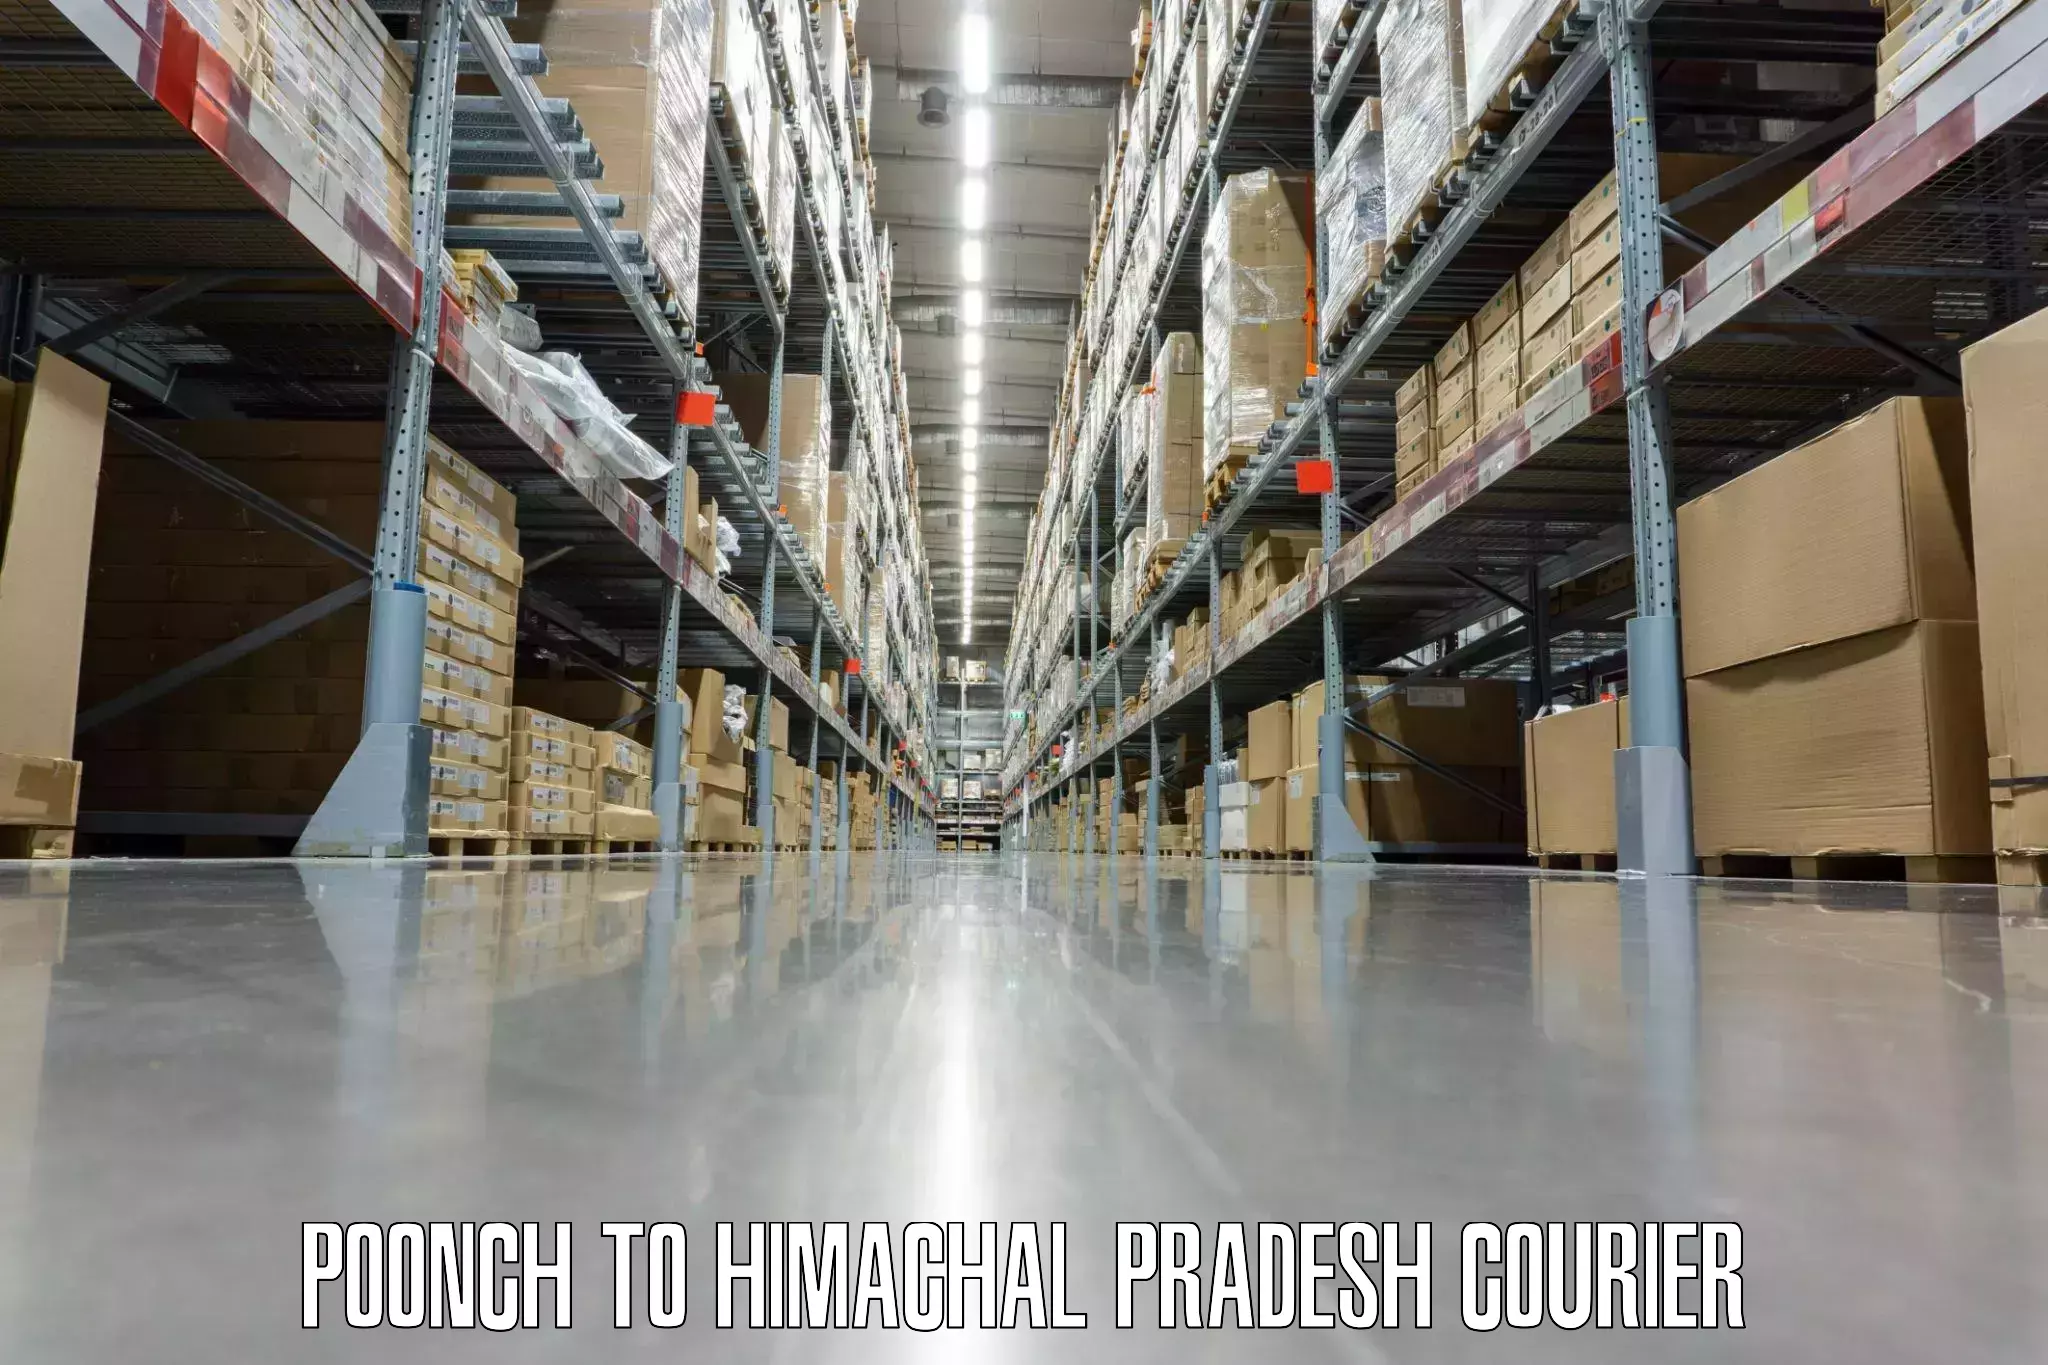 Luggage shipment specialists Poonch to Himachal Pradesh